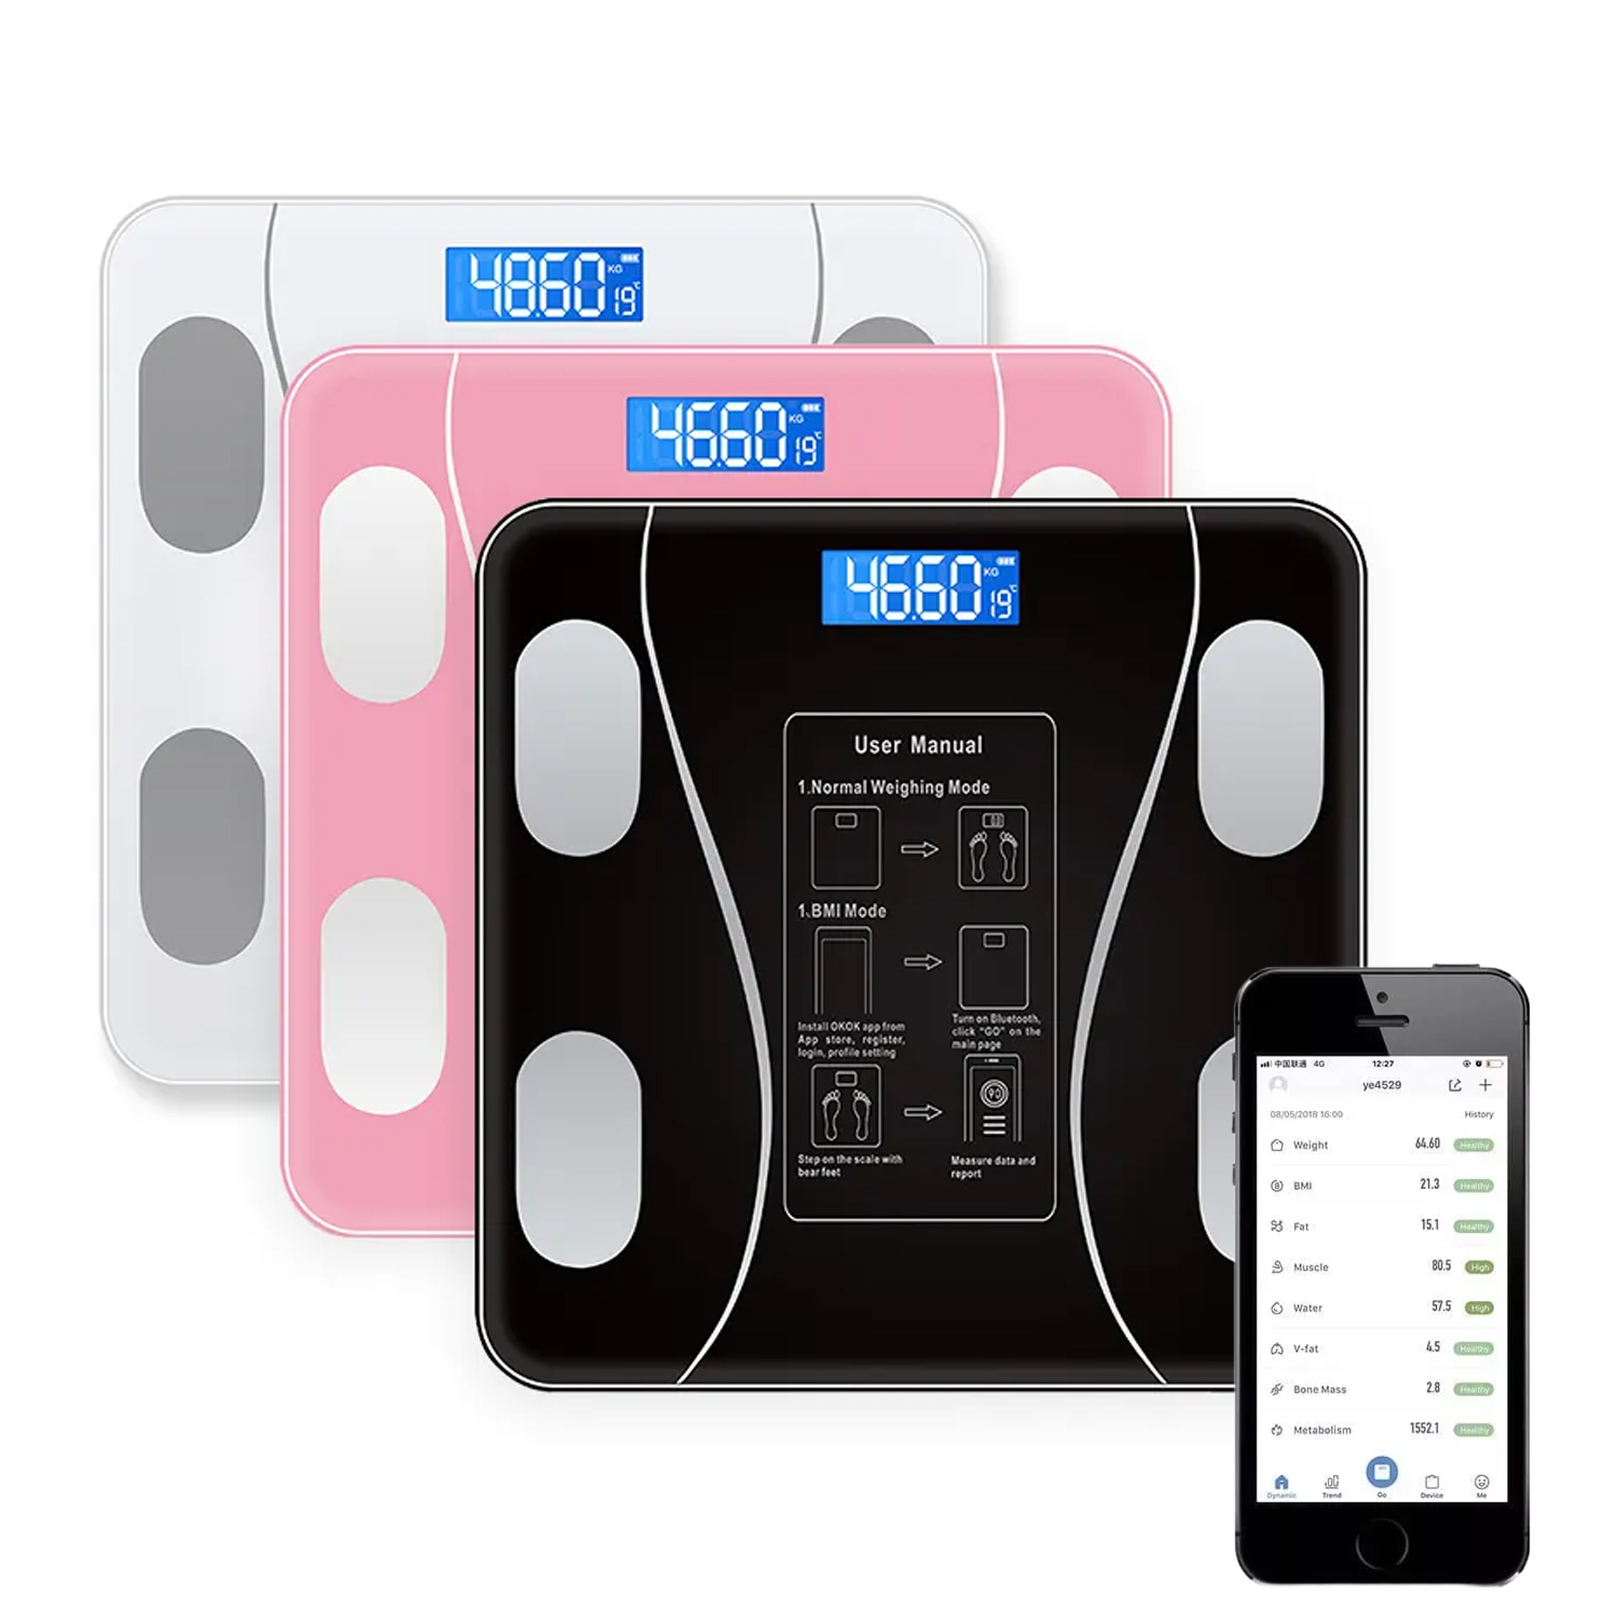 Abyon Bluetooth Smart Scale For Free In Dallas, TX